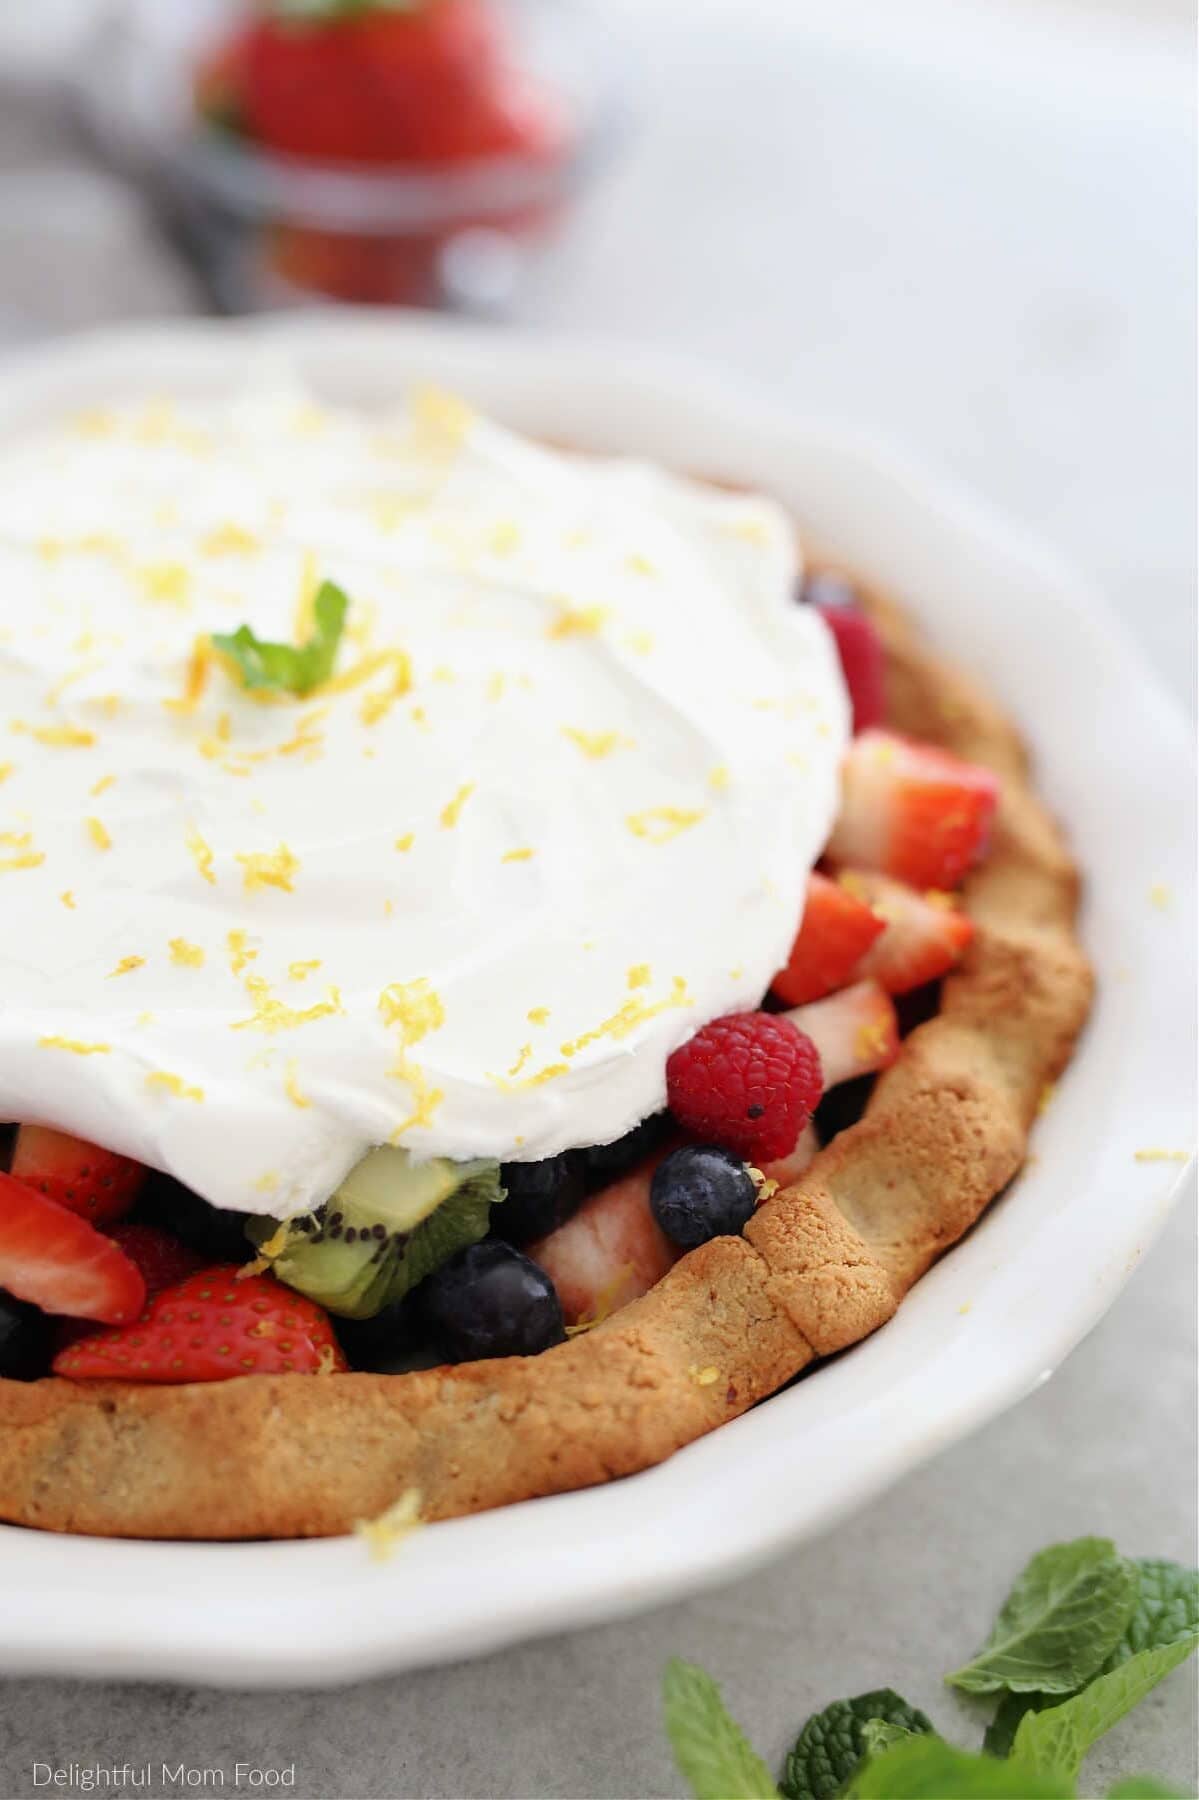 Paleo pie crust filled with fresh fruit and a whipped topping.